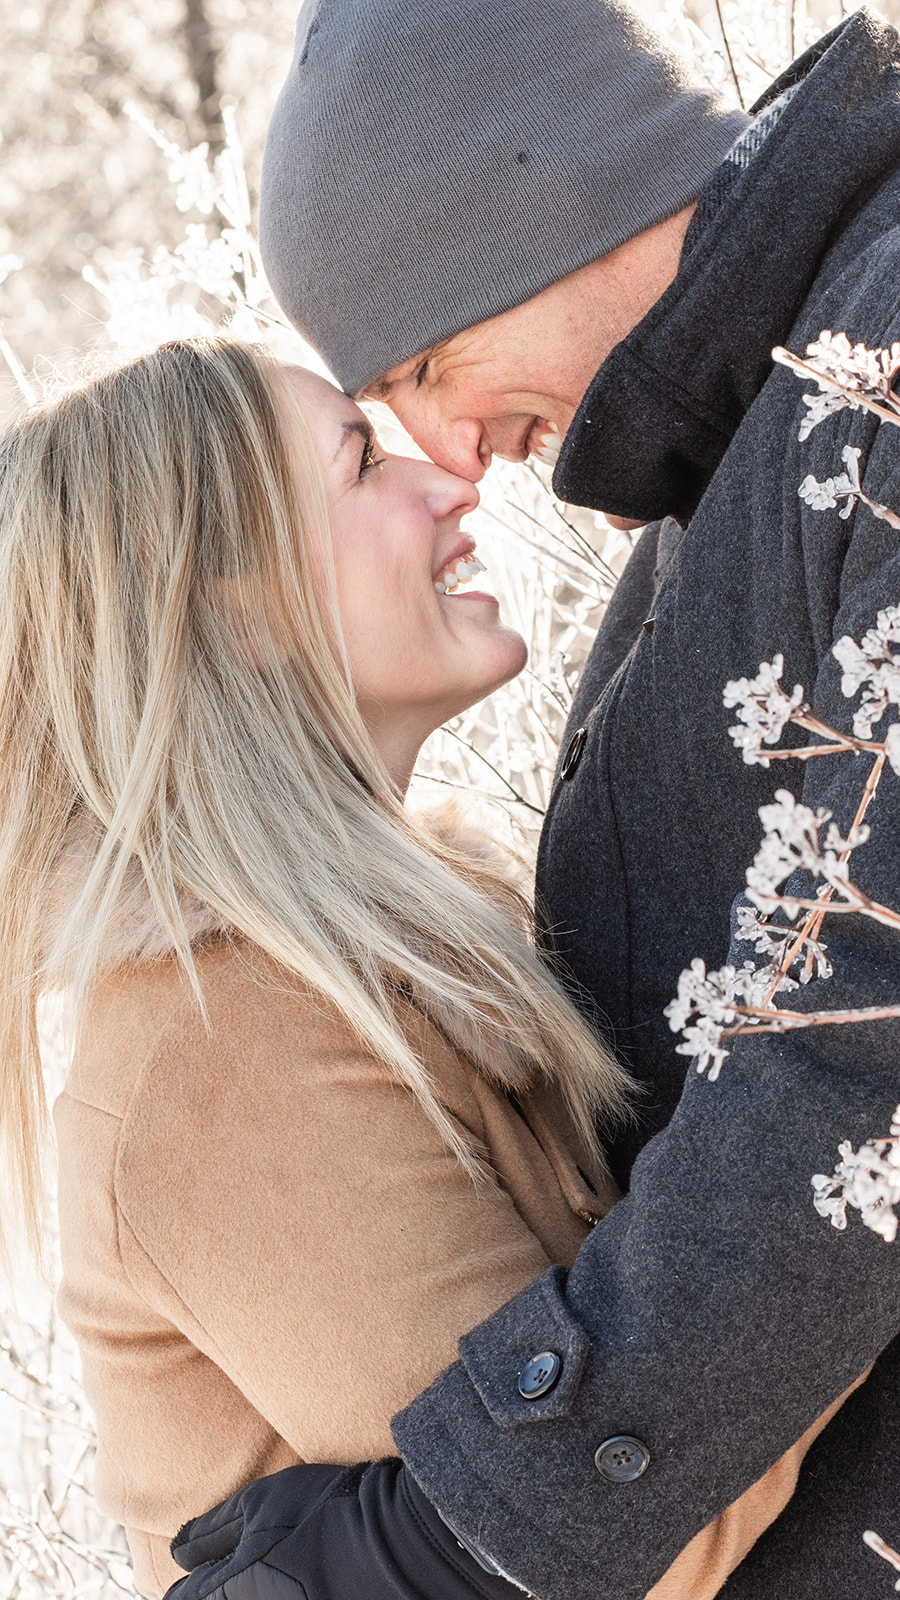 Dear Parents - Are you making time for your spouse? Capturing our live through a winter photo shoot with Lainy Jean Photography. Take time for photos with your spouse. #couplesphotography #anniversaryphotos #engagementphotos #winterphotography #wisconsinphotgraphy - Wisconsin Photography Lainy Jean